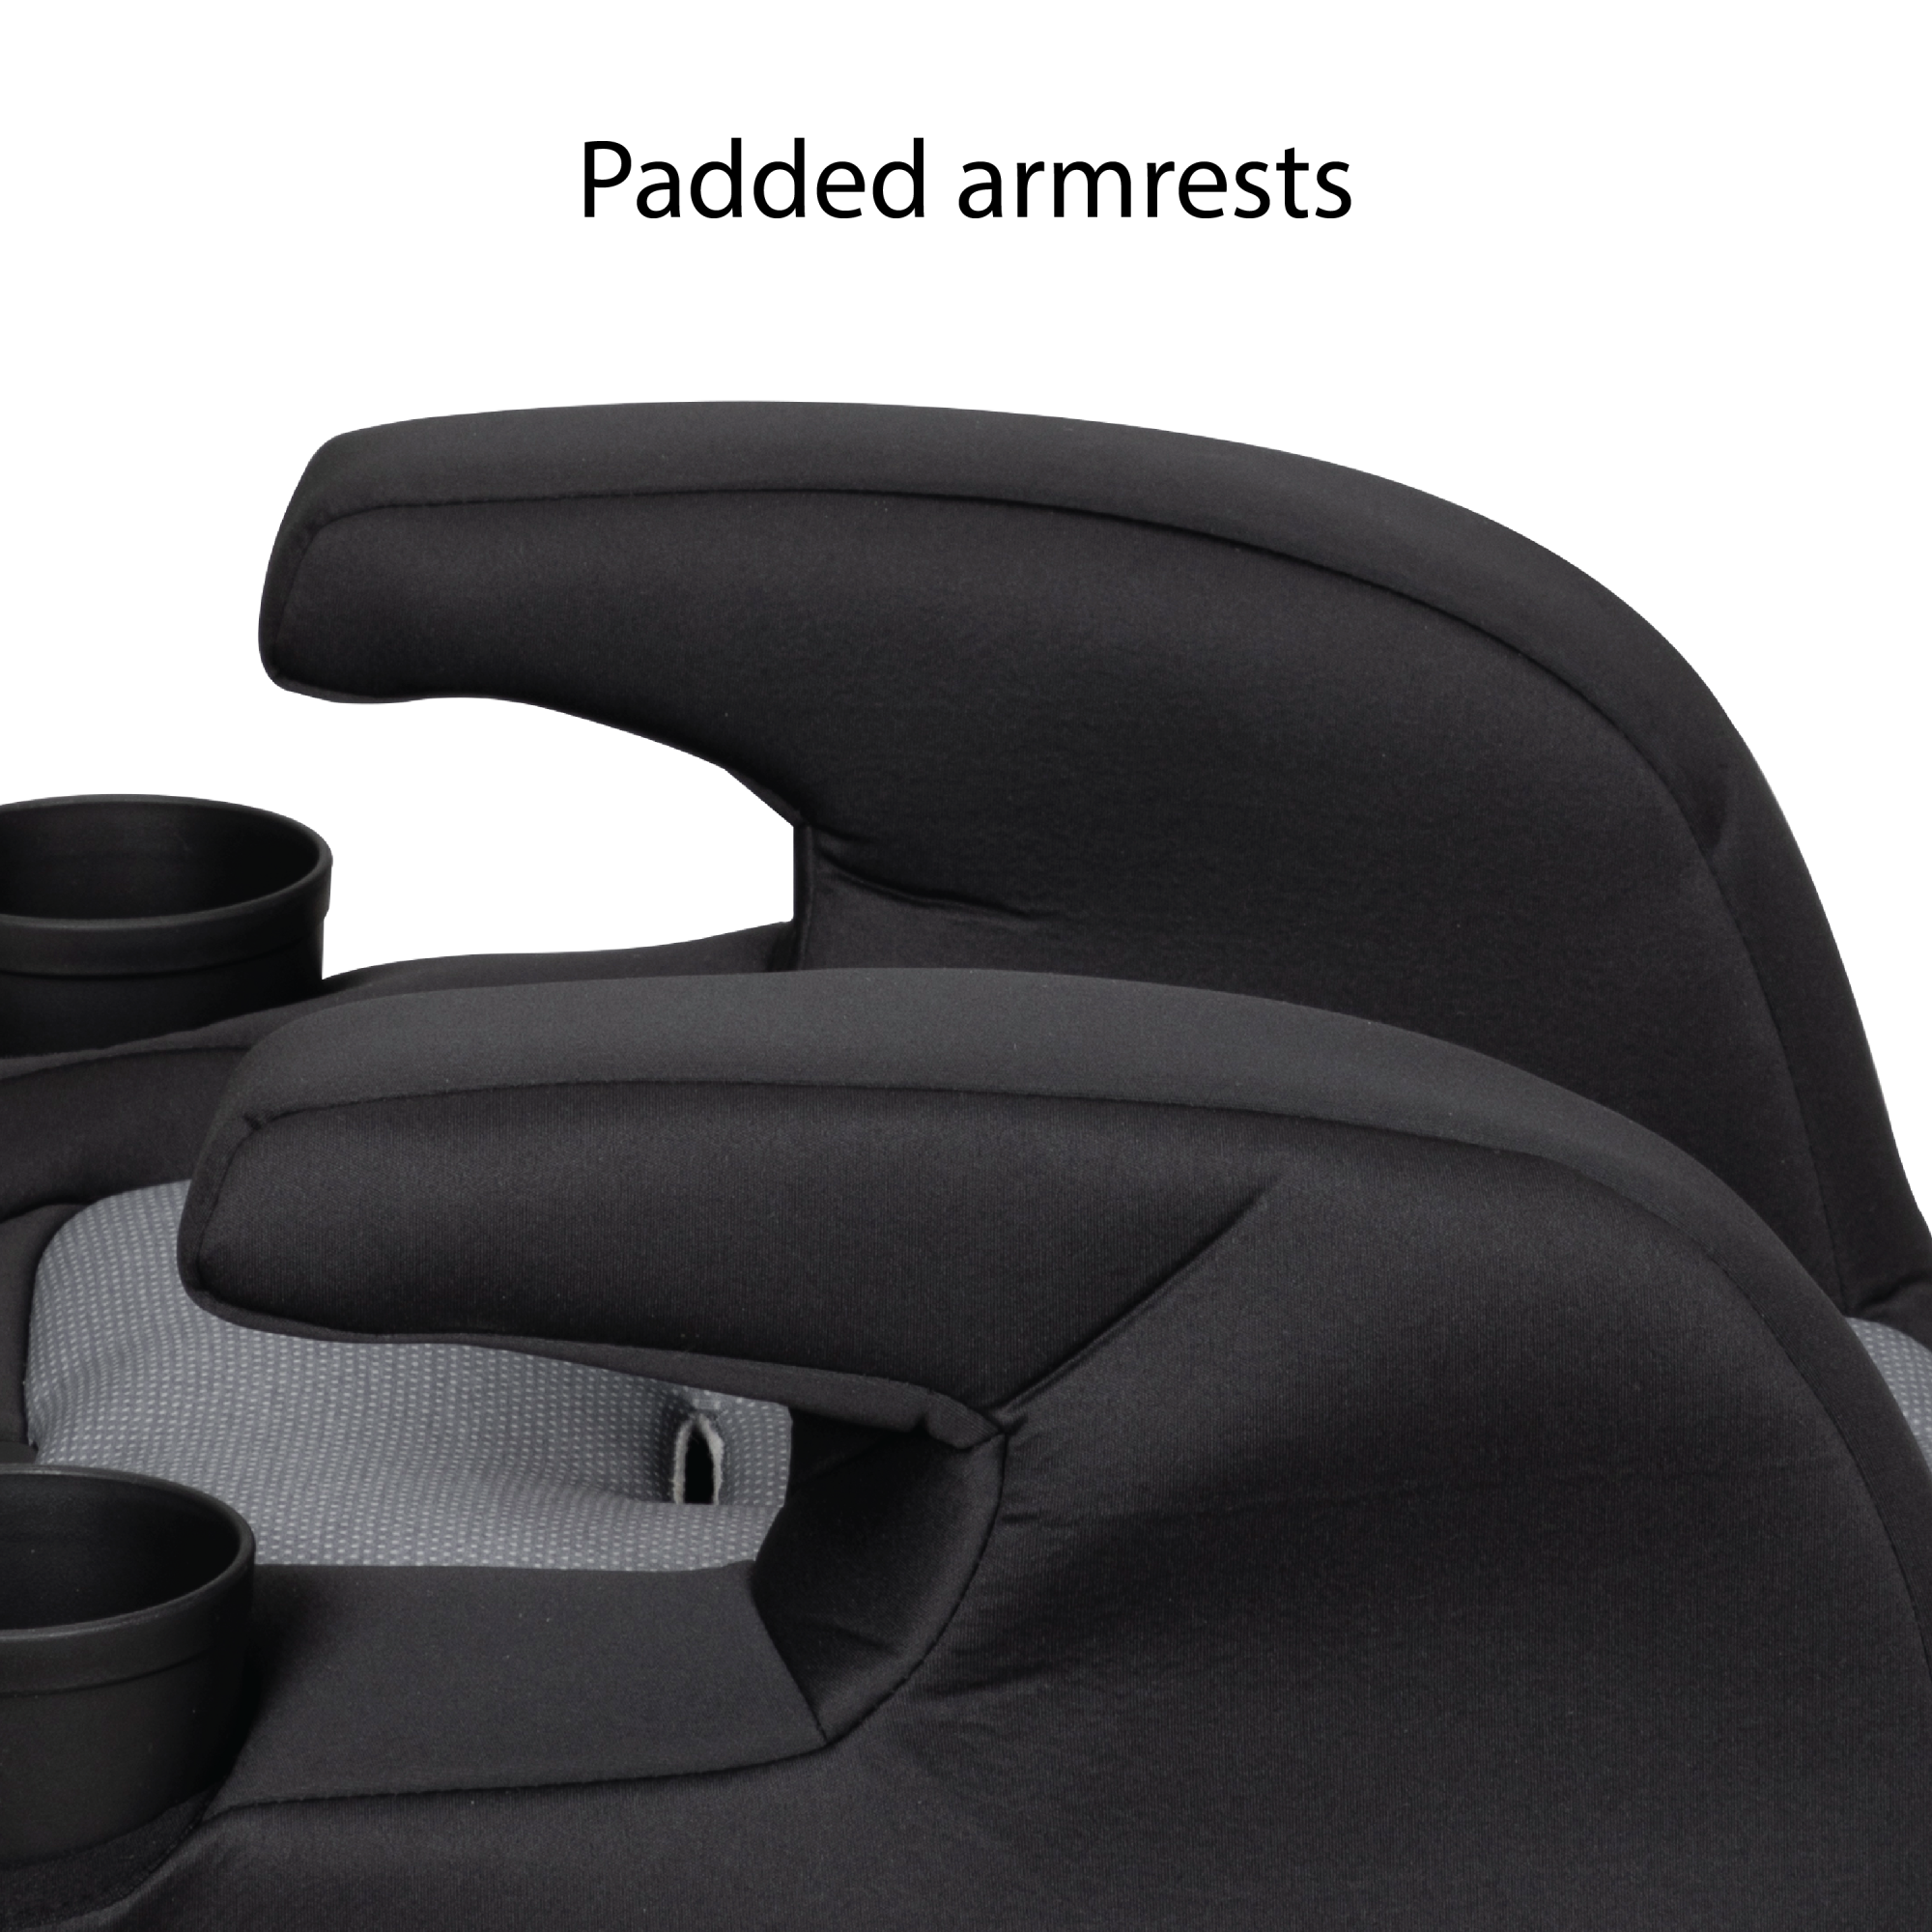 Boost-and-Go All-in-One Harness Booster Car Seat - 2 removable, dishwasher-safe cup holders